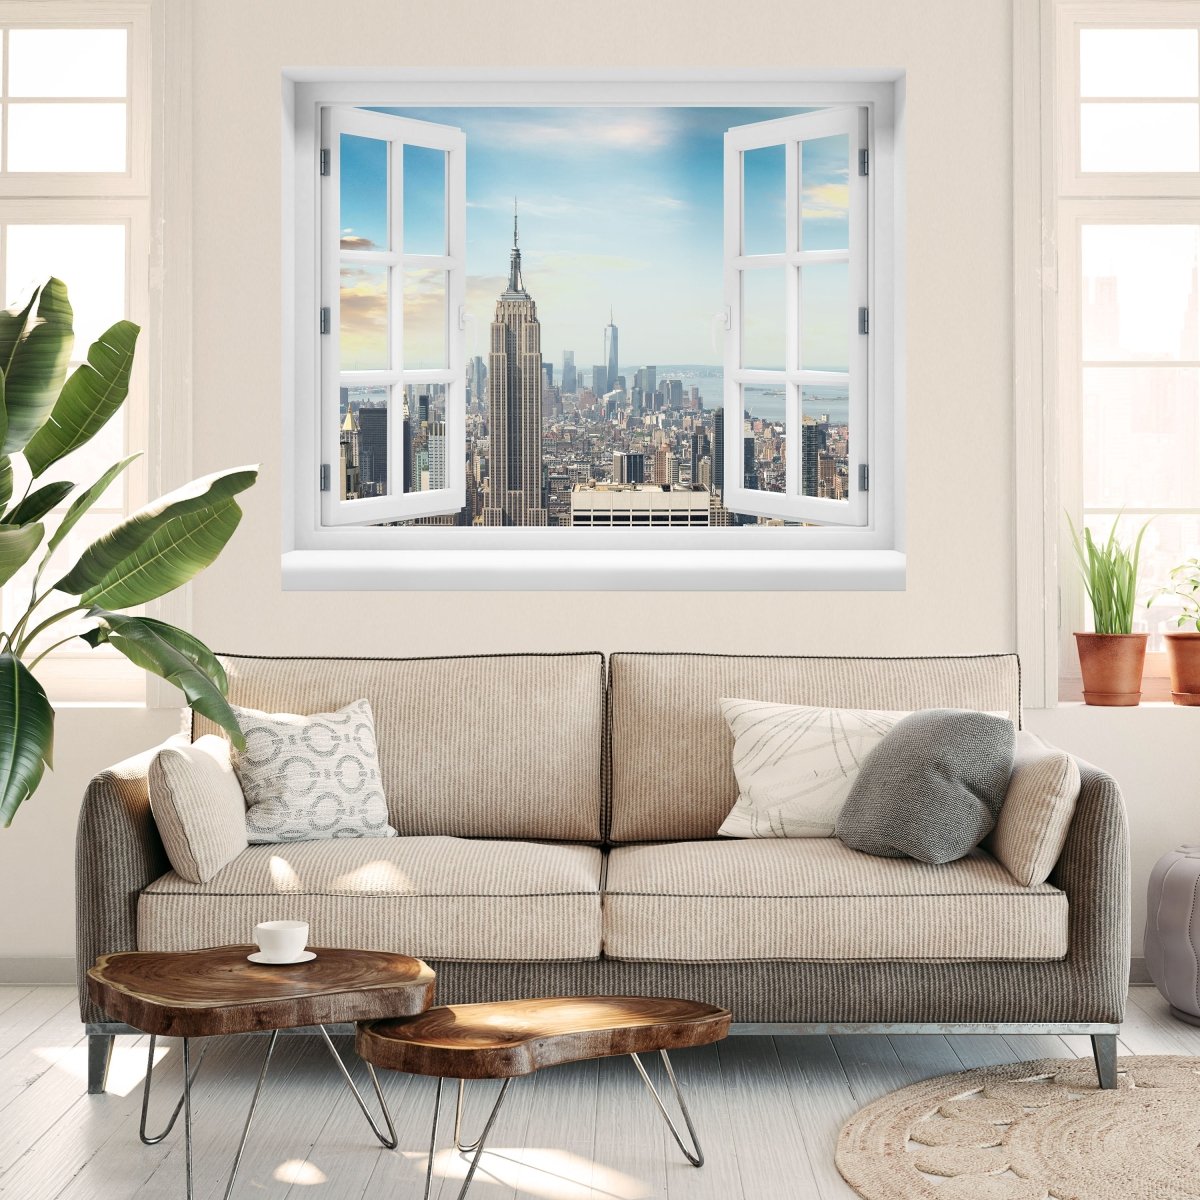 3D wall sticker Midtown and Manhattan - NYC - Wall Decal M0725